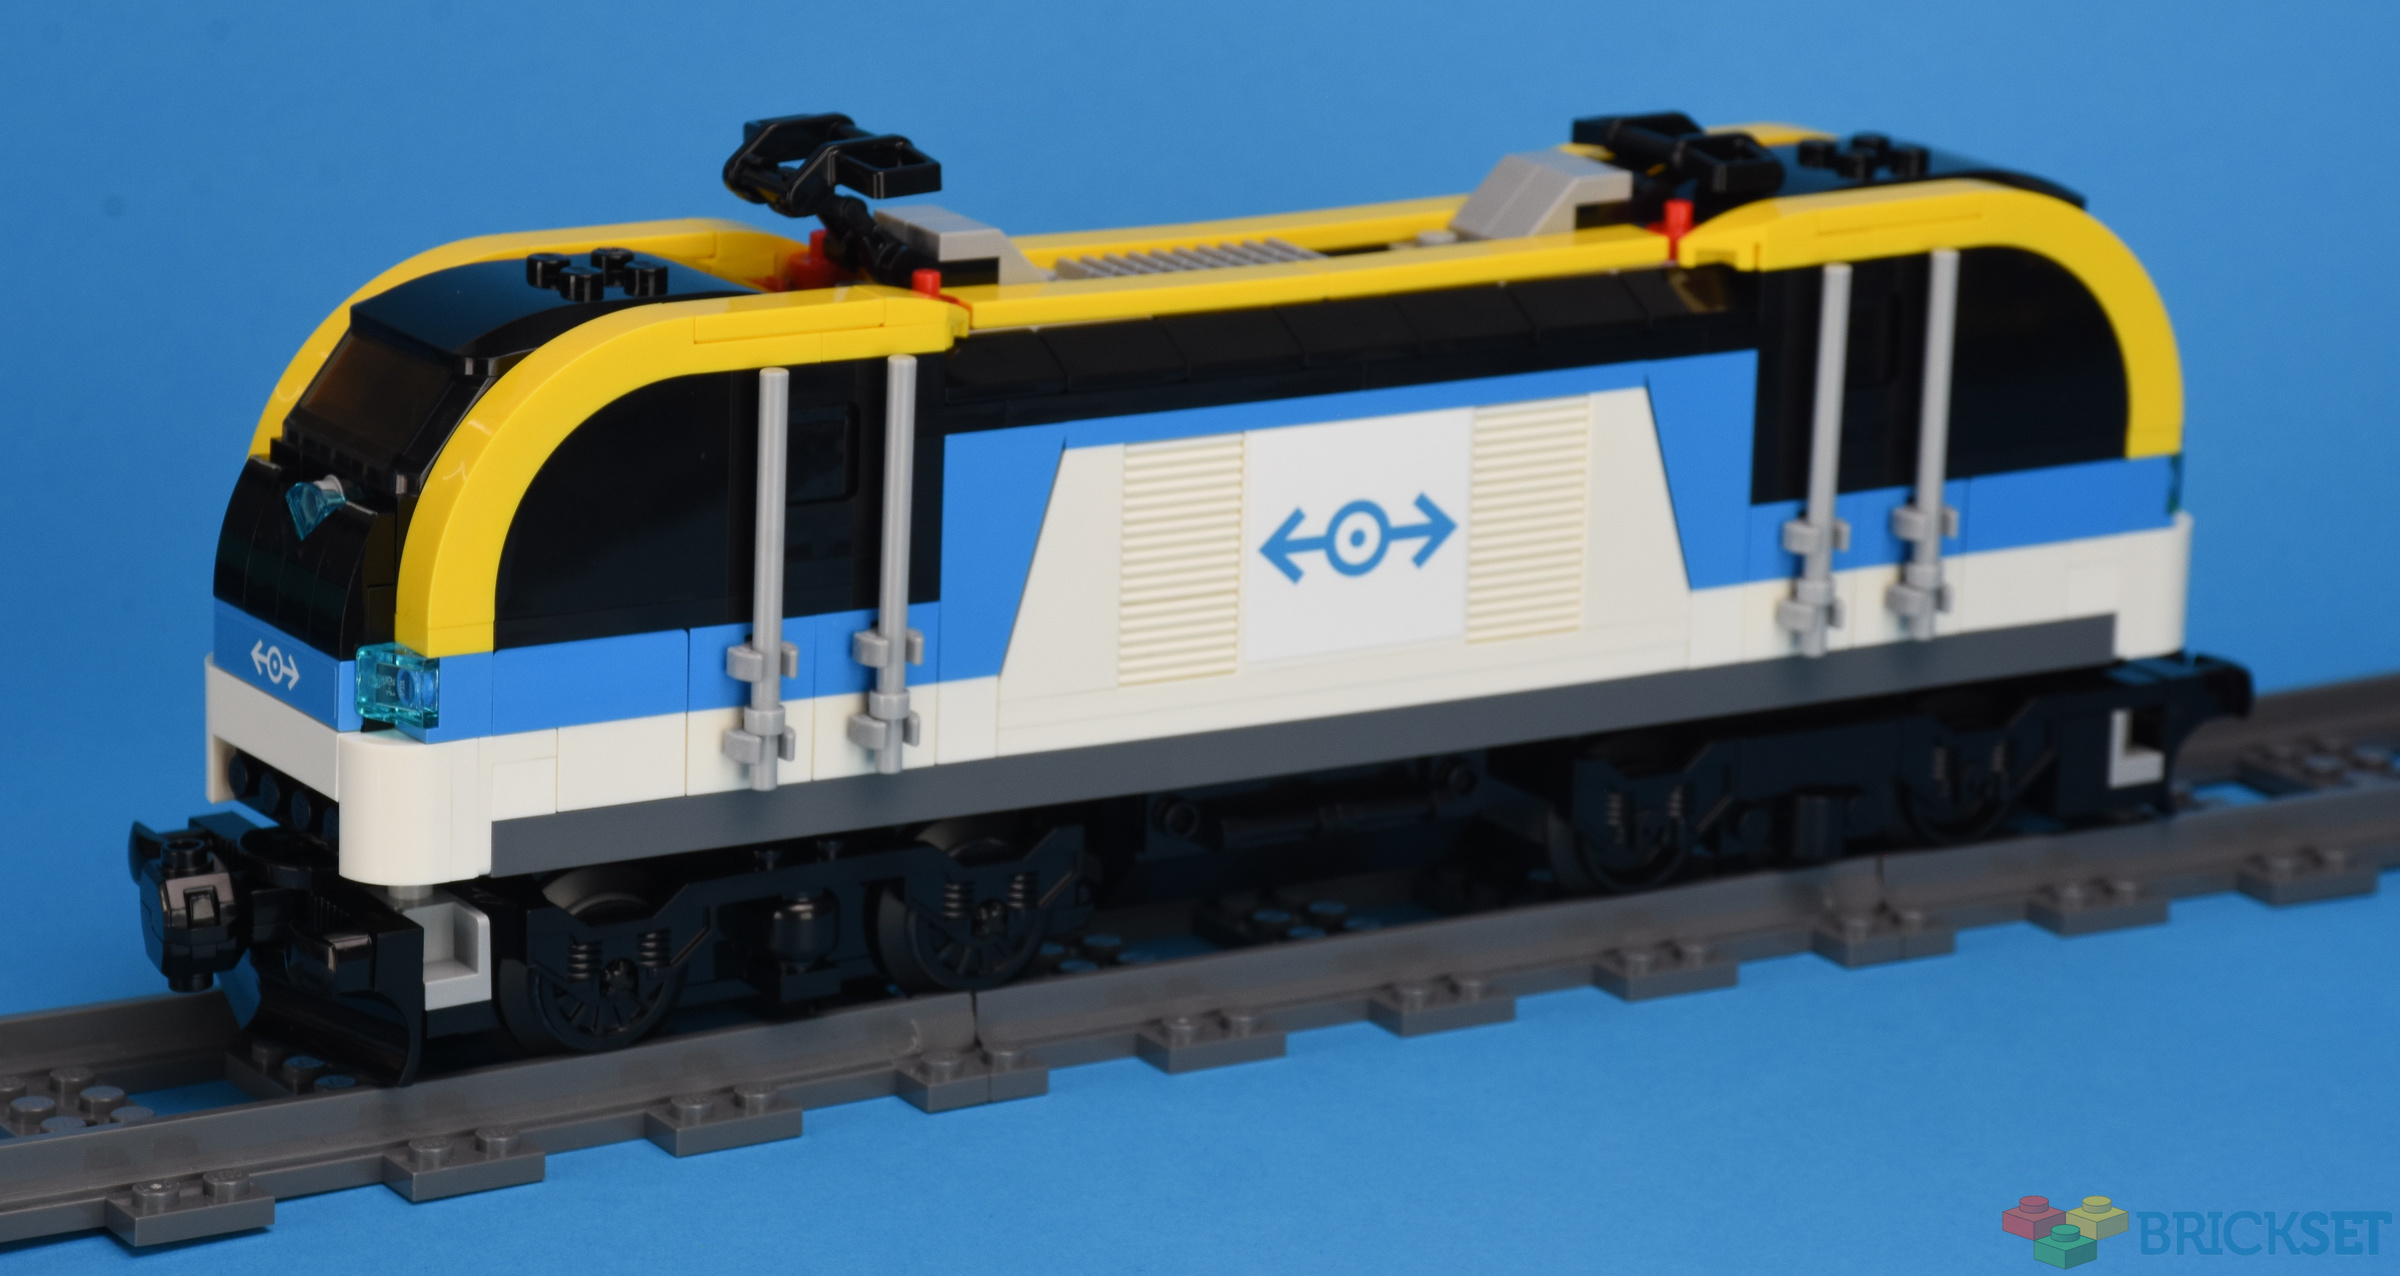 LEGO City 60336 Freight Train detailed review & light upgrade 